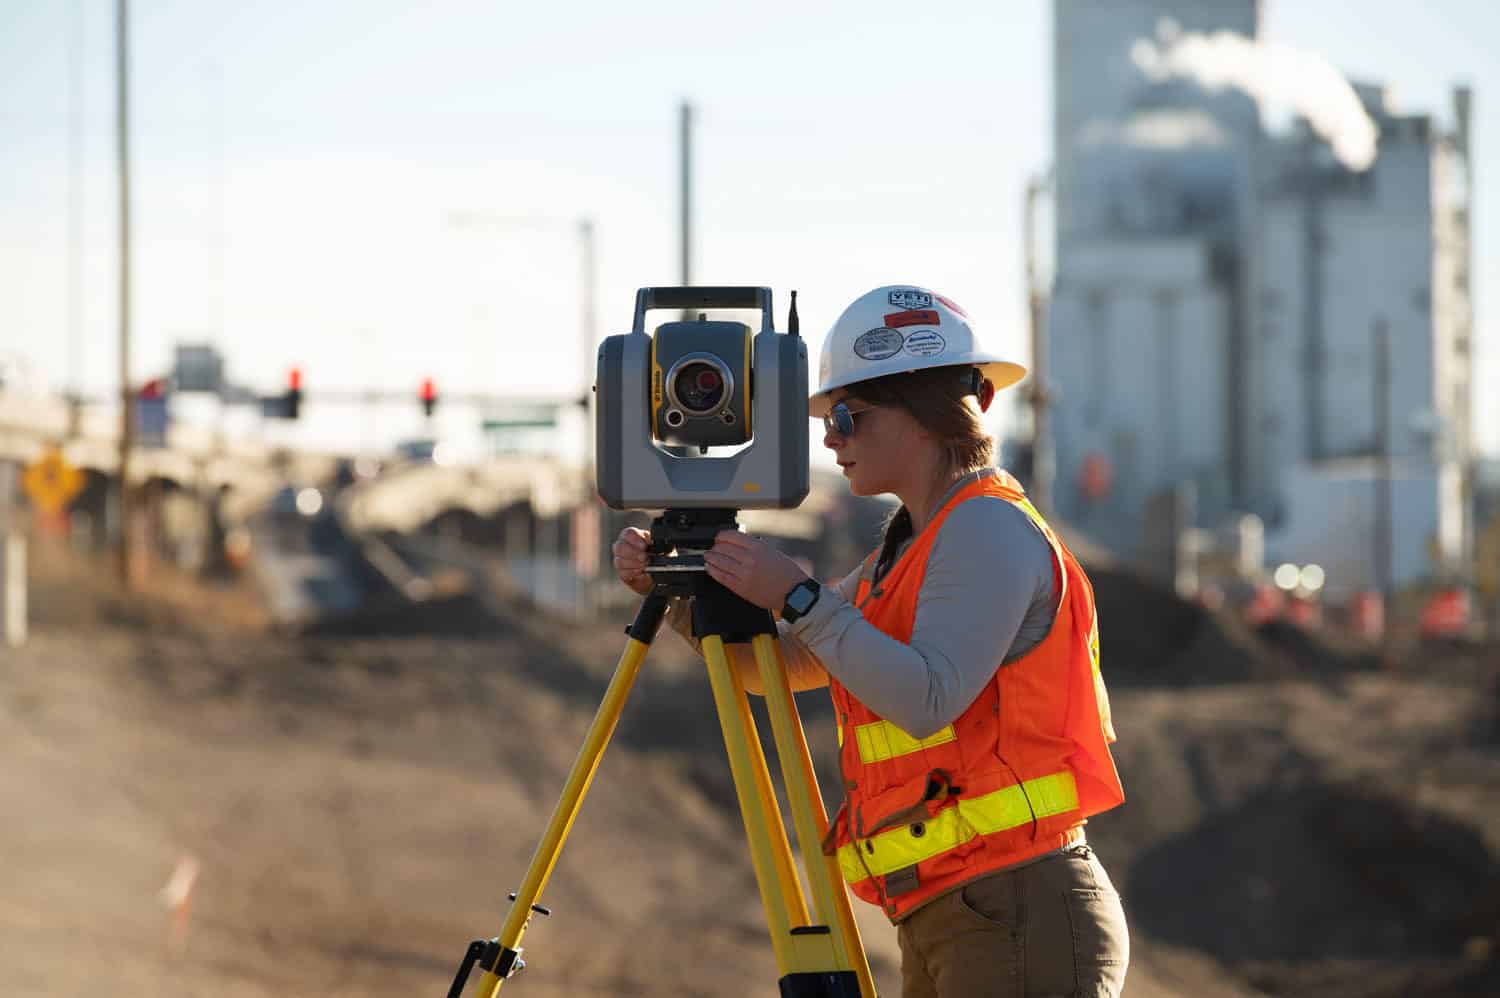 New Trimble SX12 Scanning Total Station Adds Features and Applications for Versatile Everyday Surveying and Scanning | Civil + Structural Engineer magazine